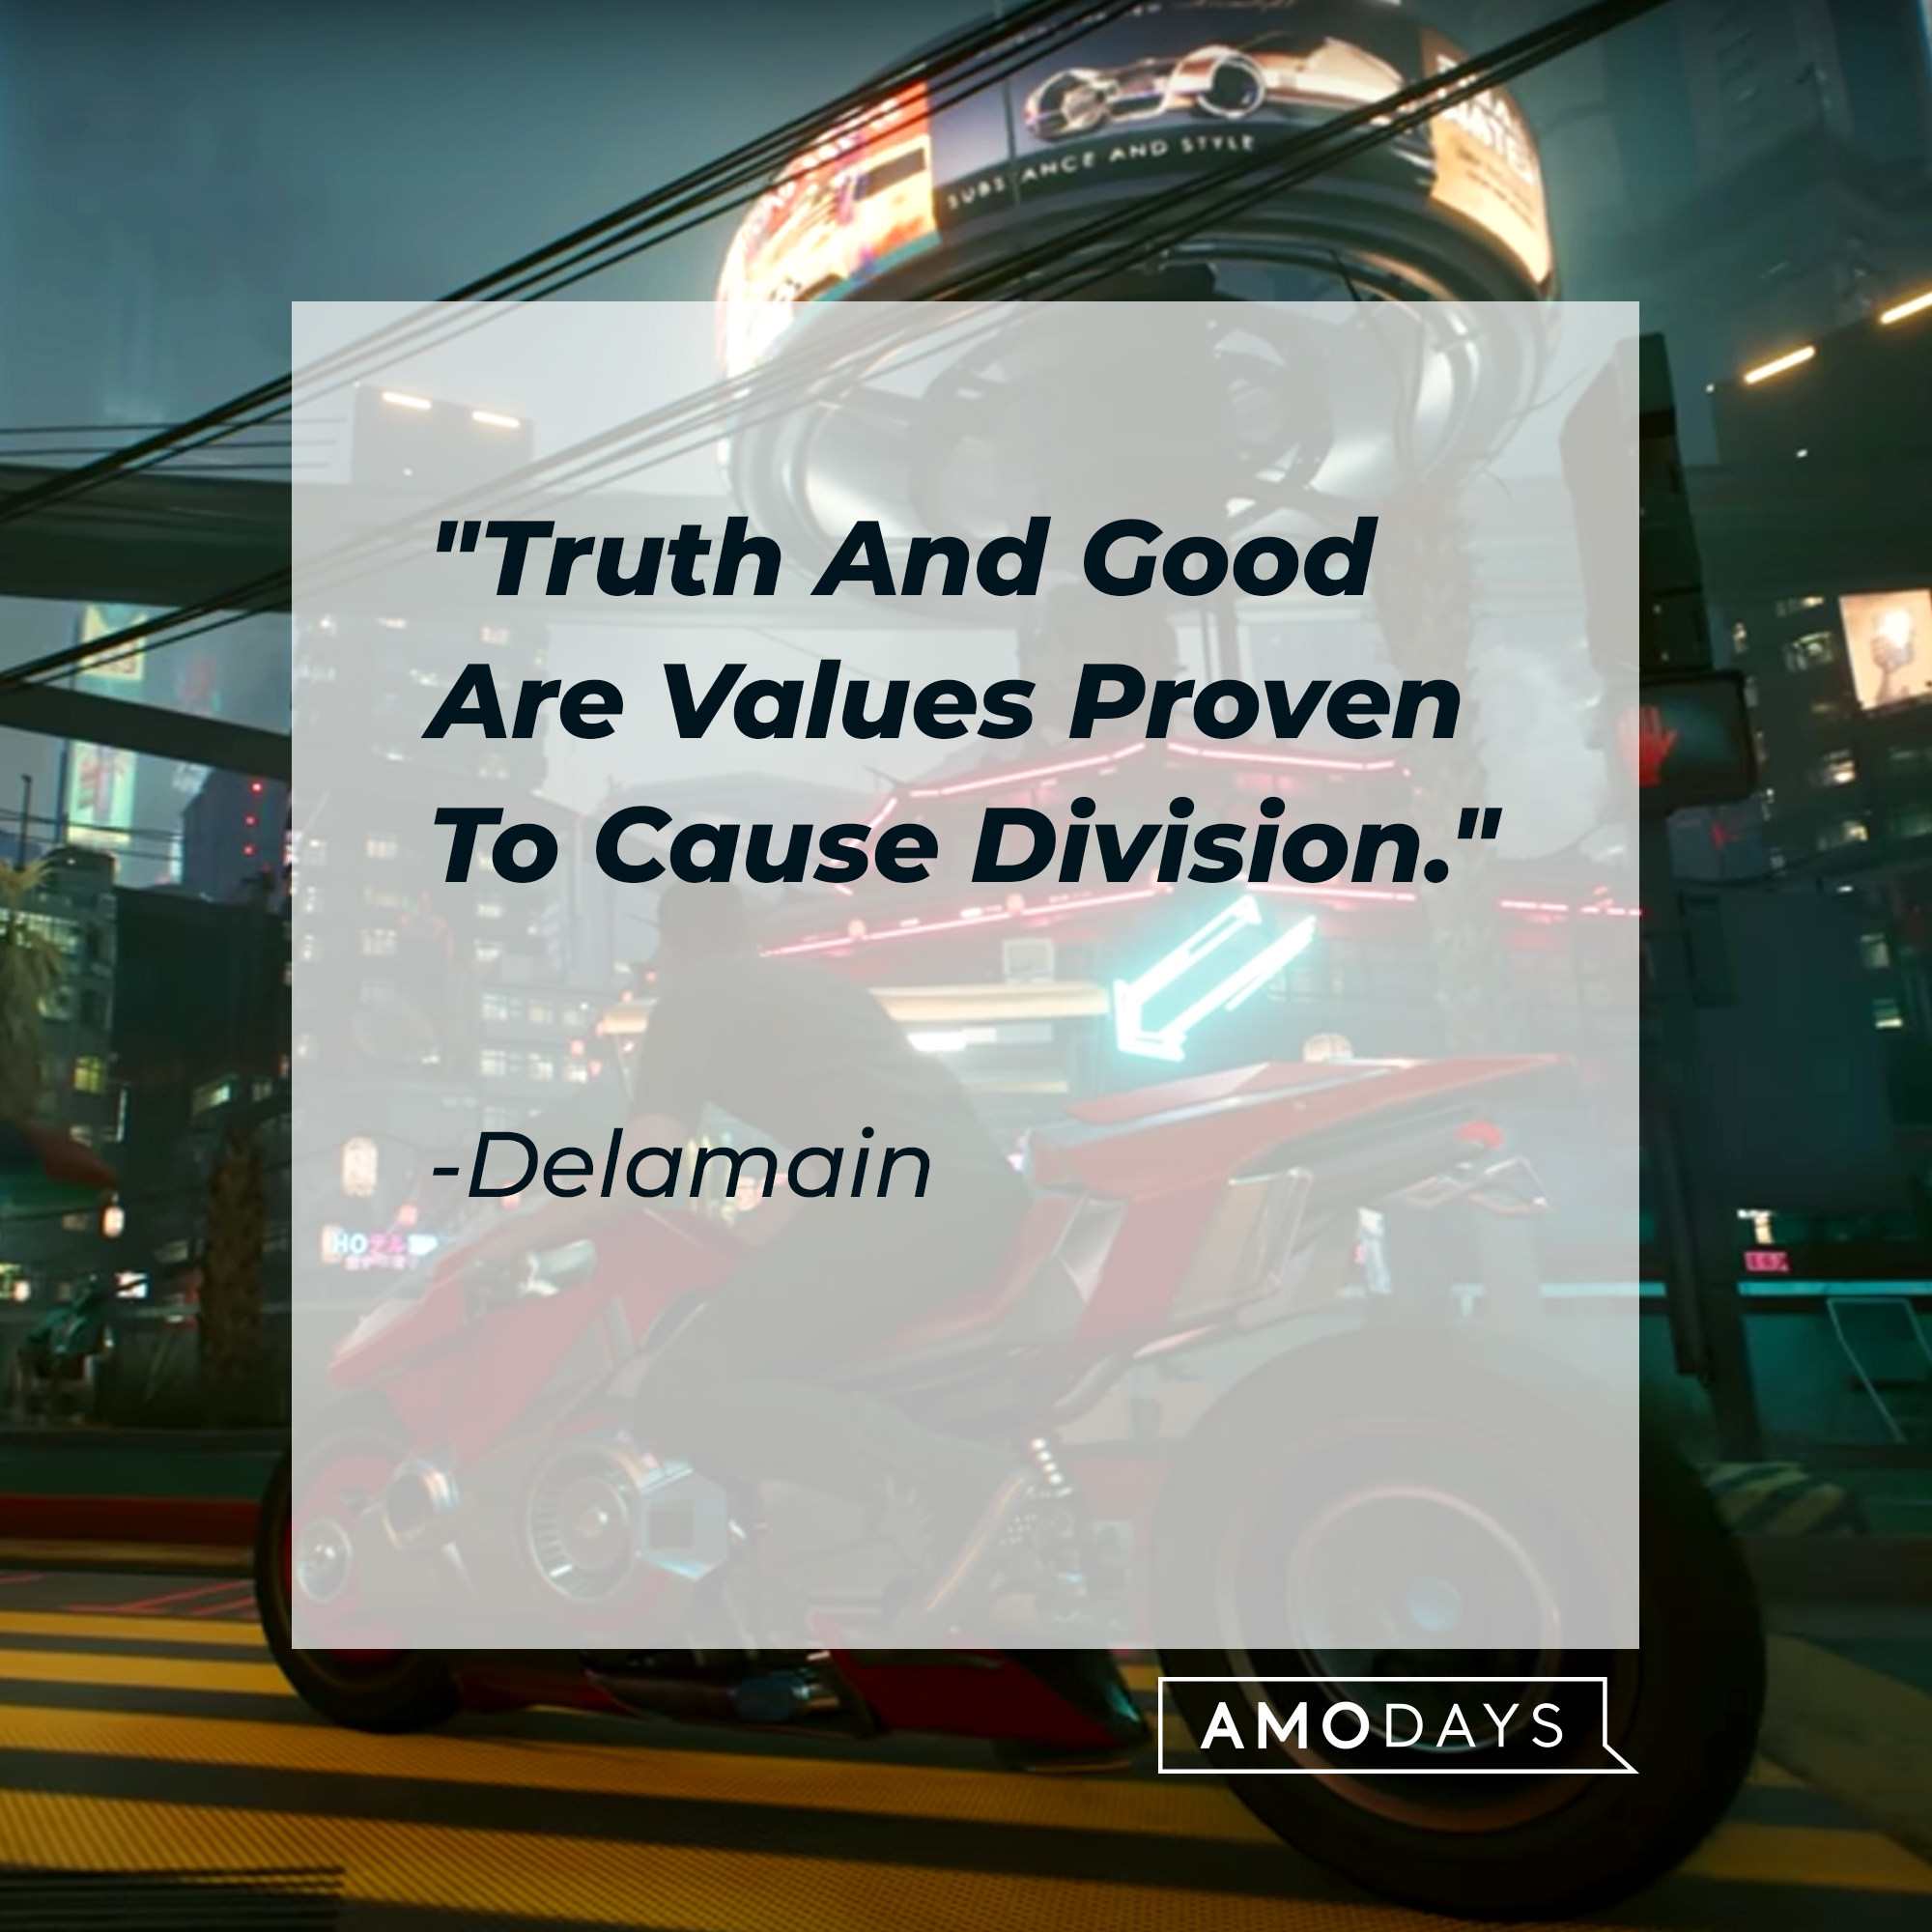 Delamain's quote: "Truth And Good Are Values Proven To Cause Division." | Source: youtube.com/CyberpunkGame